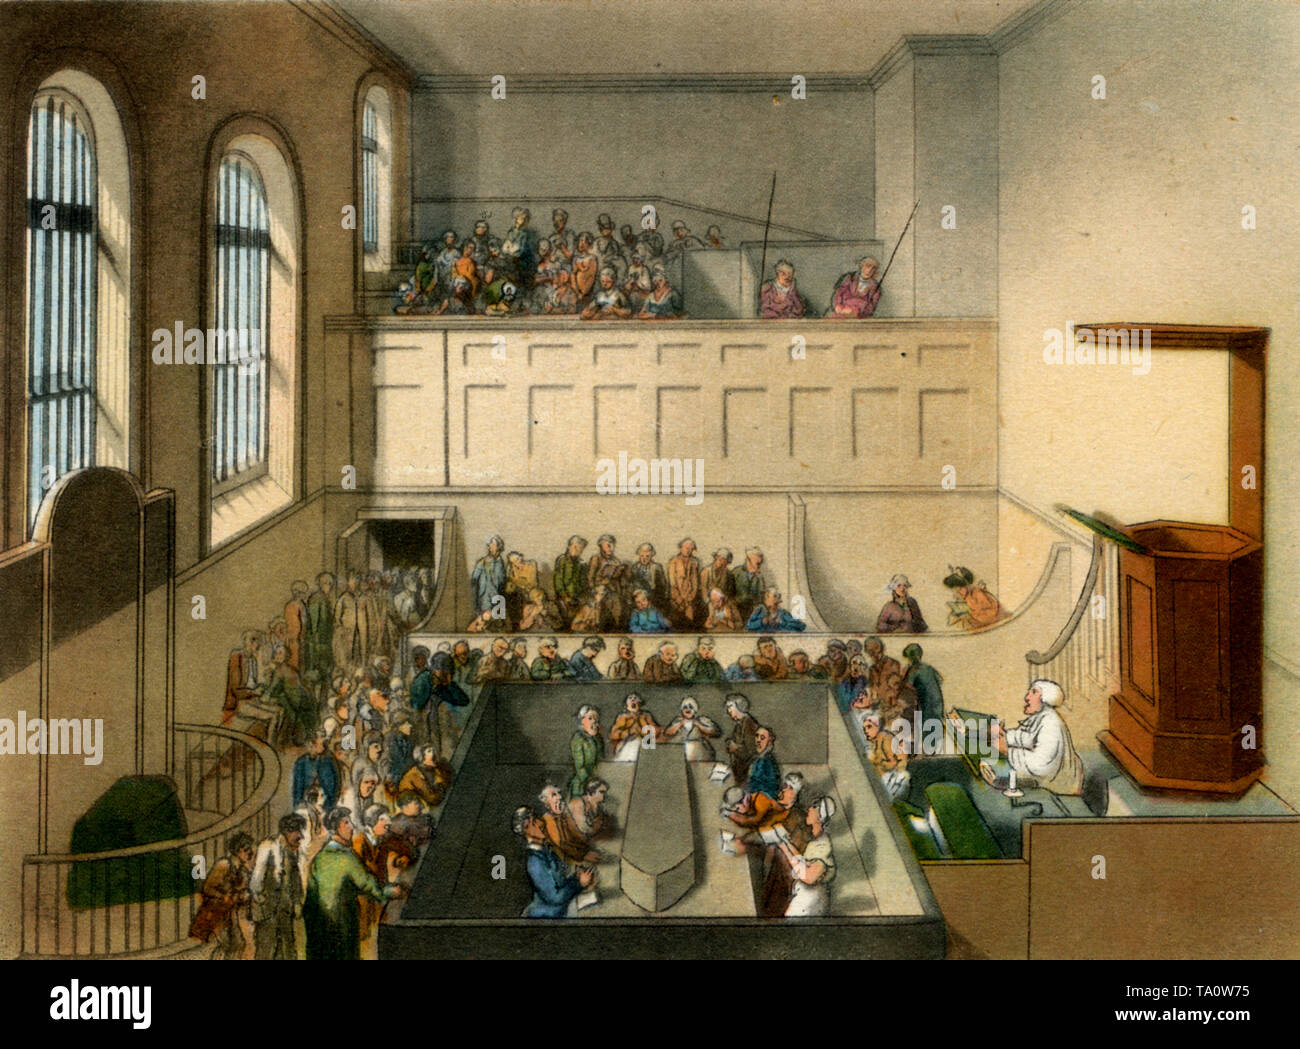 The Chapel, Newgate Gaol, c1808-1810. A print from 'The Microcosm of London'. A print from 'The Microcosm of London', by William Henry Pyne (1770-1843). Artists: Thomas Rowlandson (1756-1827) and Auguste Charles Pugin (1762-1832). The prison chapel of Newgate Prison designed by George Dance the Younger.The notorious prison closed in 1902, and was demolished in 1904. The Old Bailey now stands upon the site of the former prison. Stock Photo